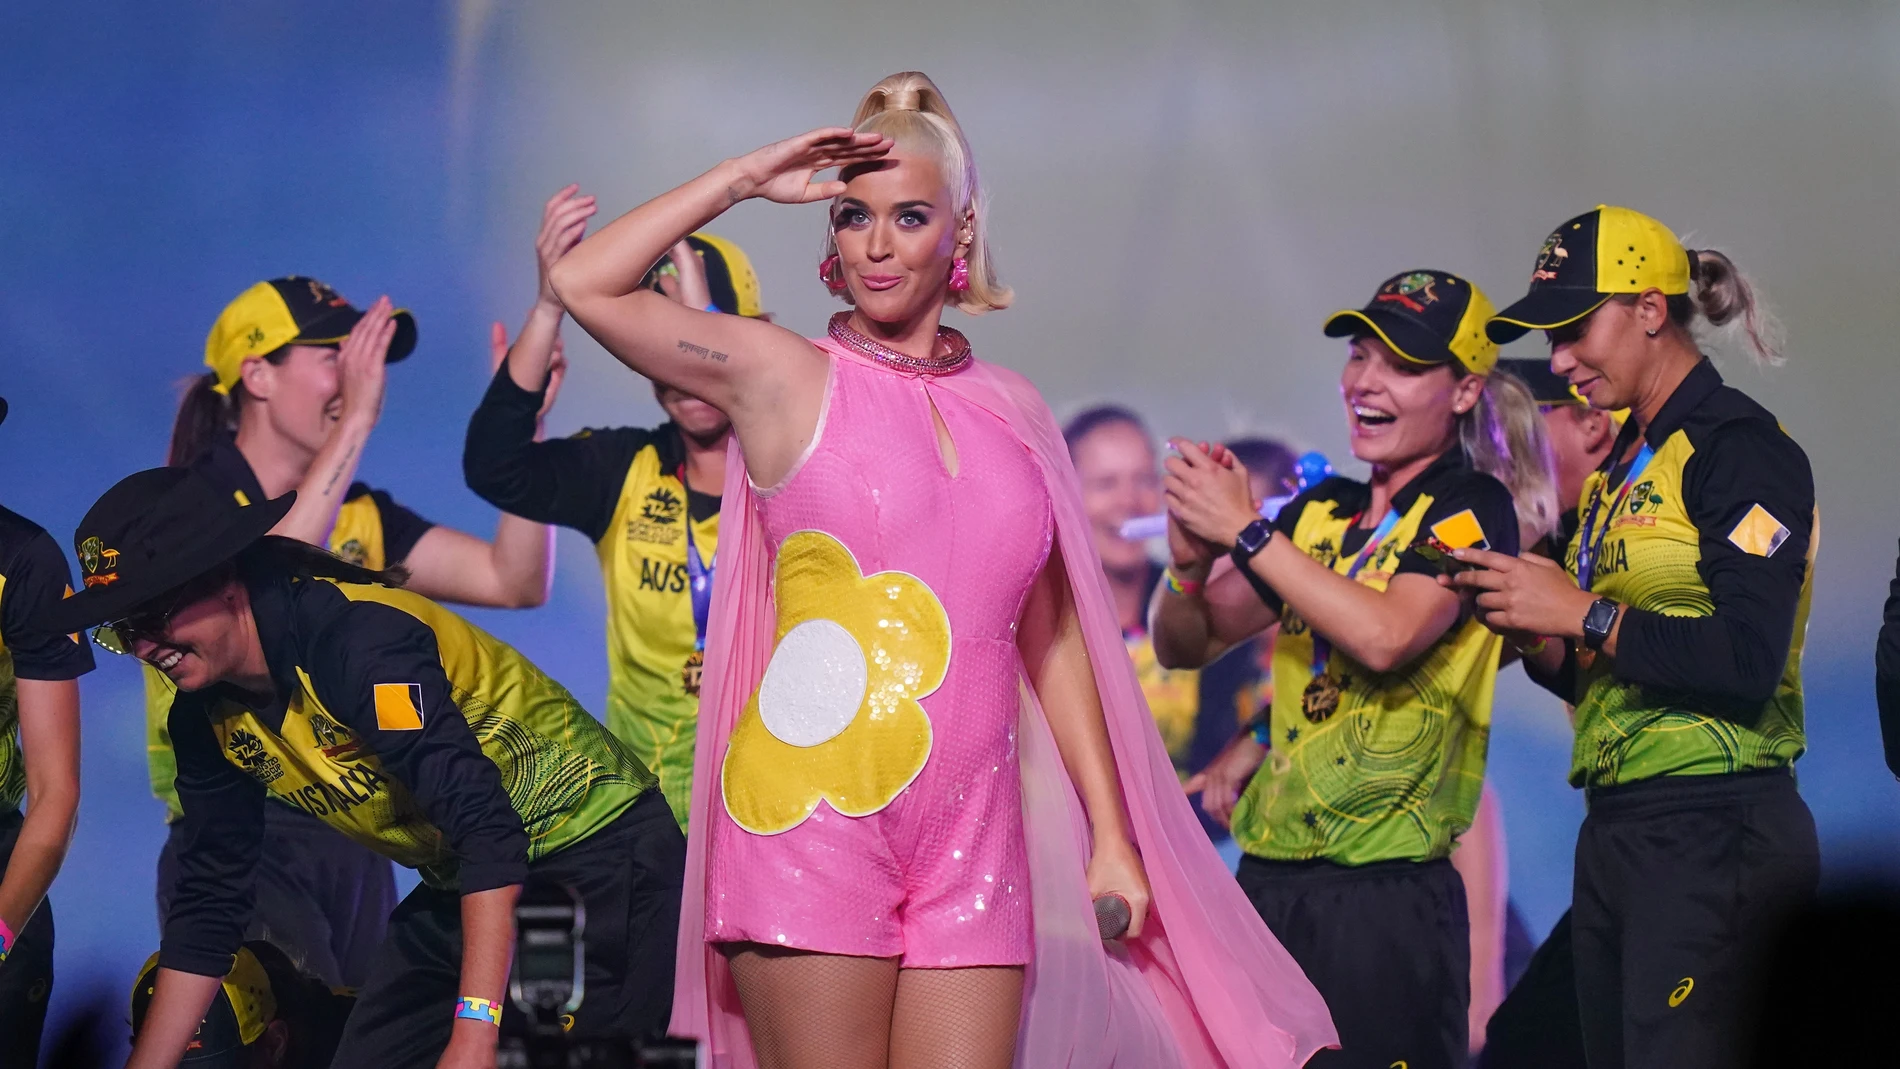 Katy Perry performs on stage with the Australian women's cricket team after the Women's T20 World Cup final match between Australia and India at the MCG in Melbourne, Sunday, March 8, 2020. (AAP Image/Scott Barbour) NO ARCHIVING, EDITORIAL USE ONLY, IMAG